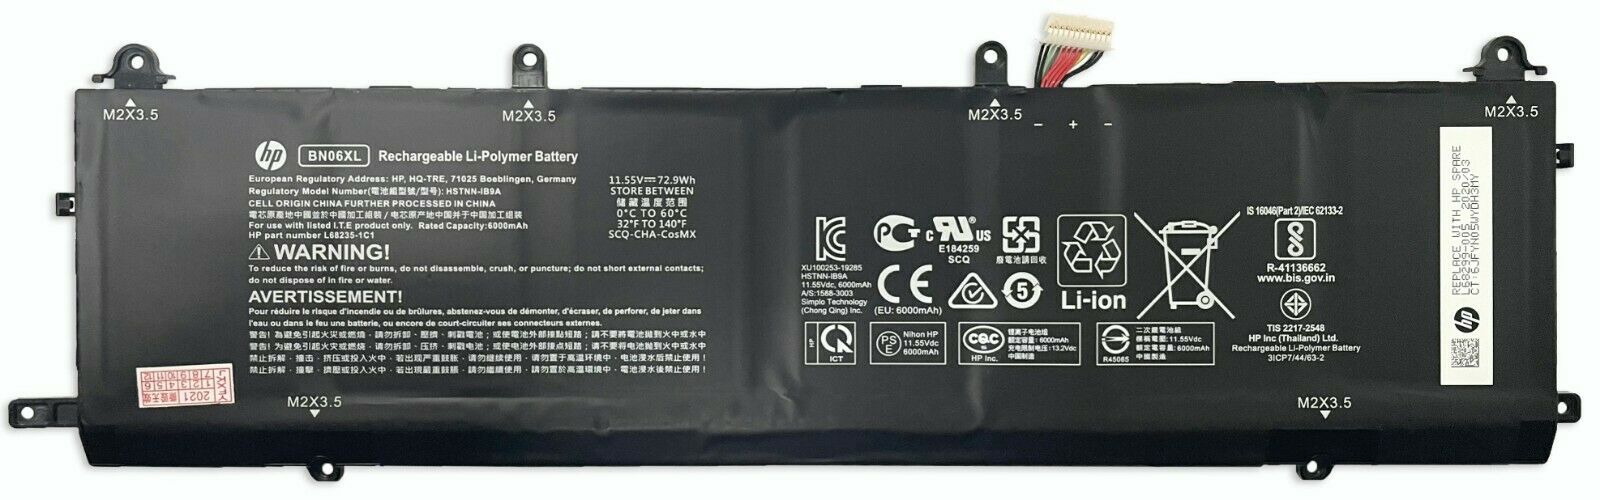 HP Spectre x360 15-eb1013nn Battery 6-cell 72.9Wh